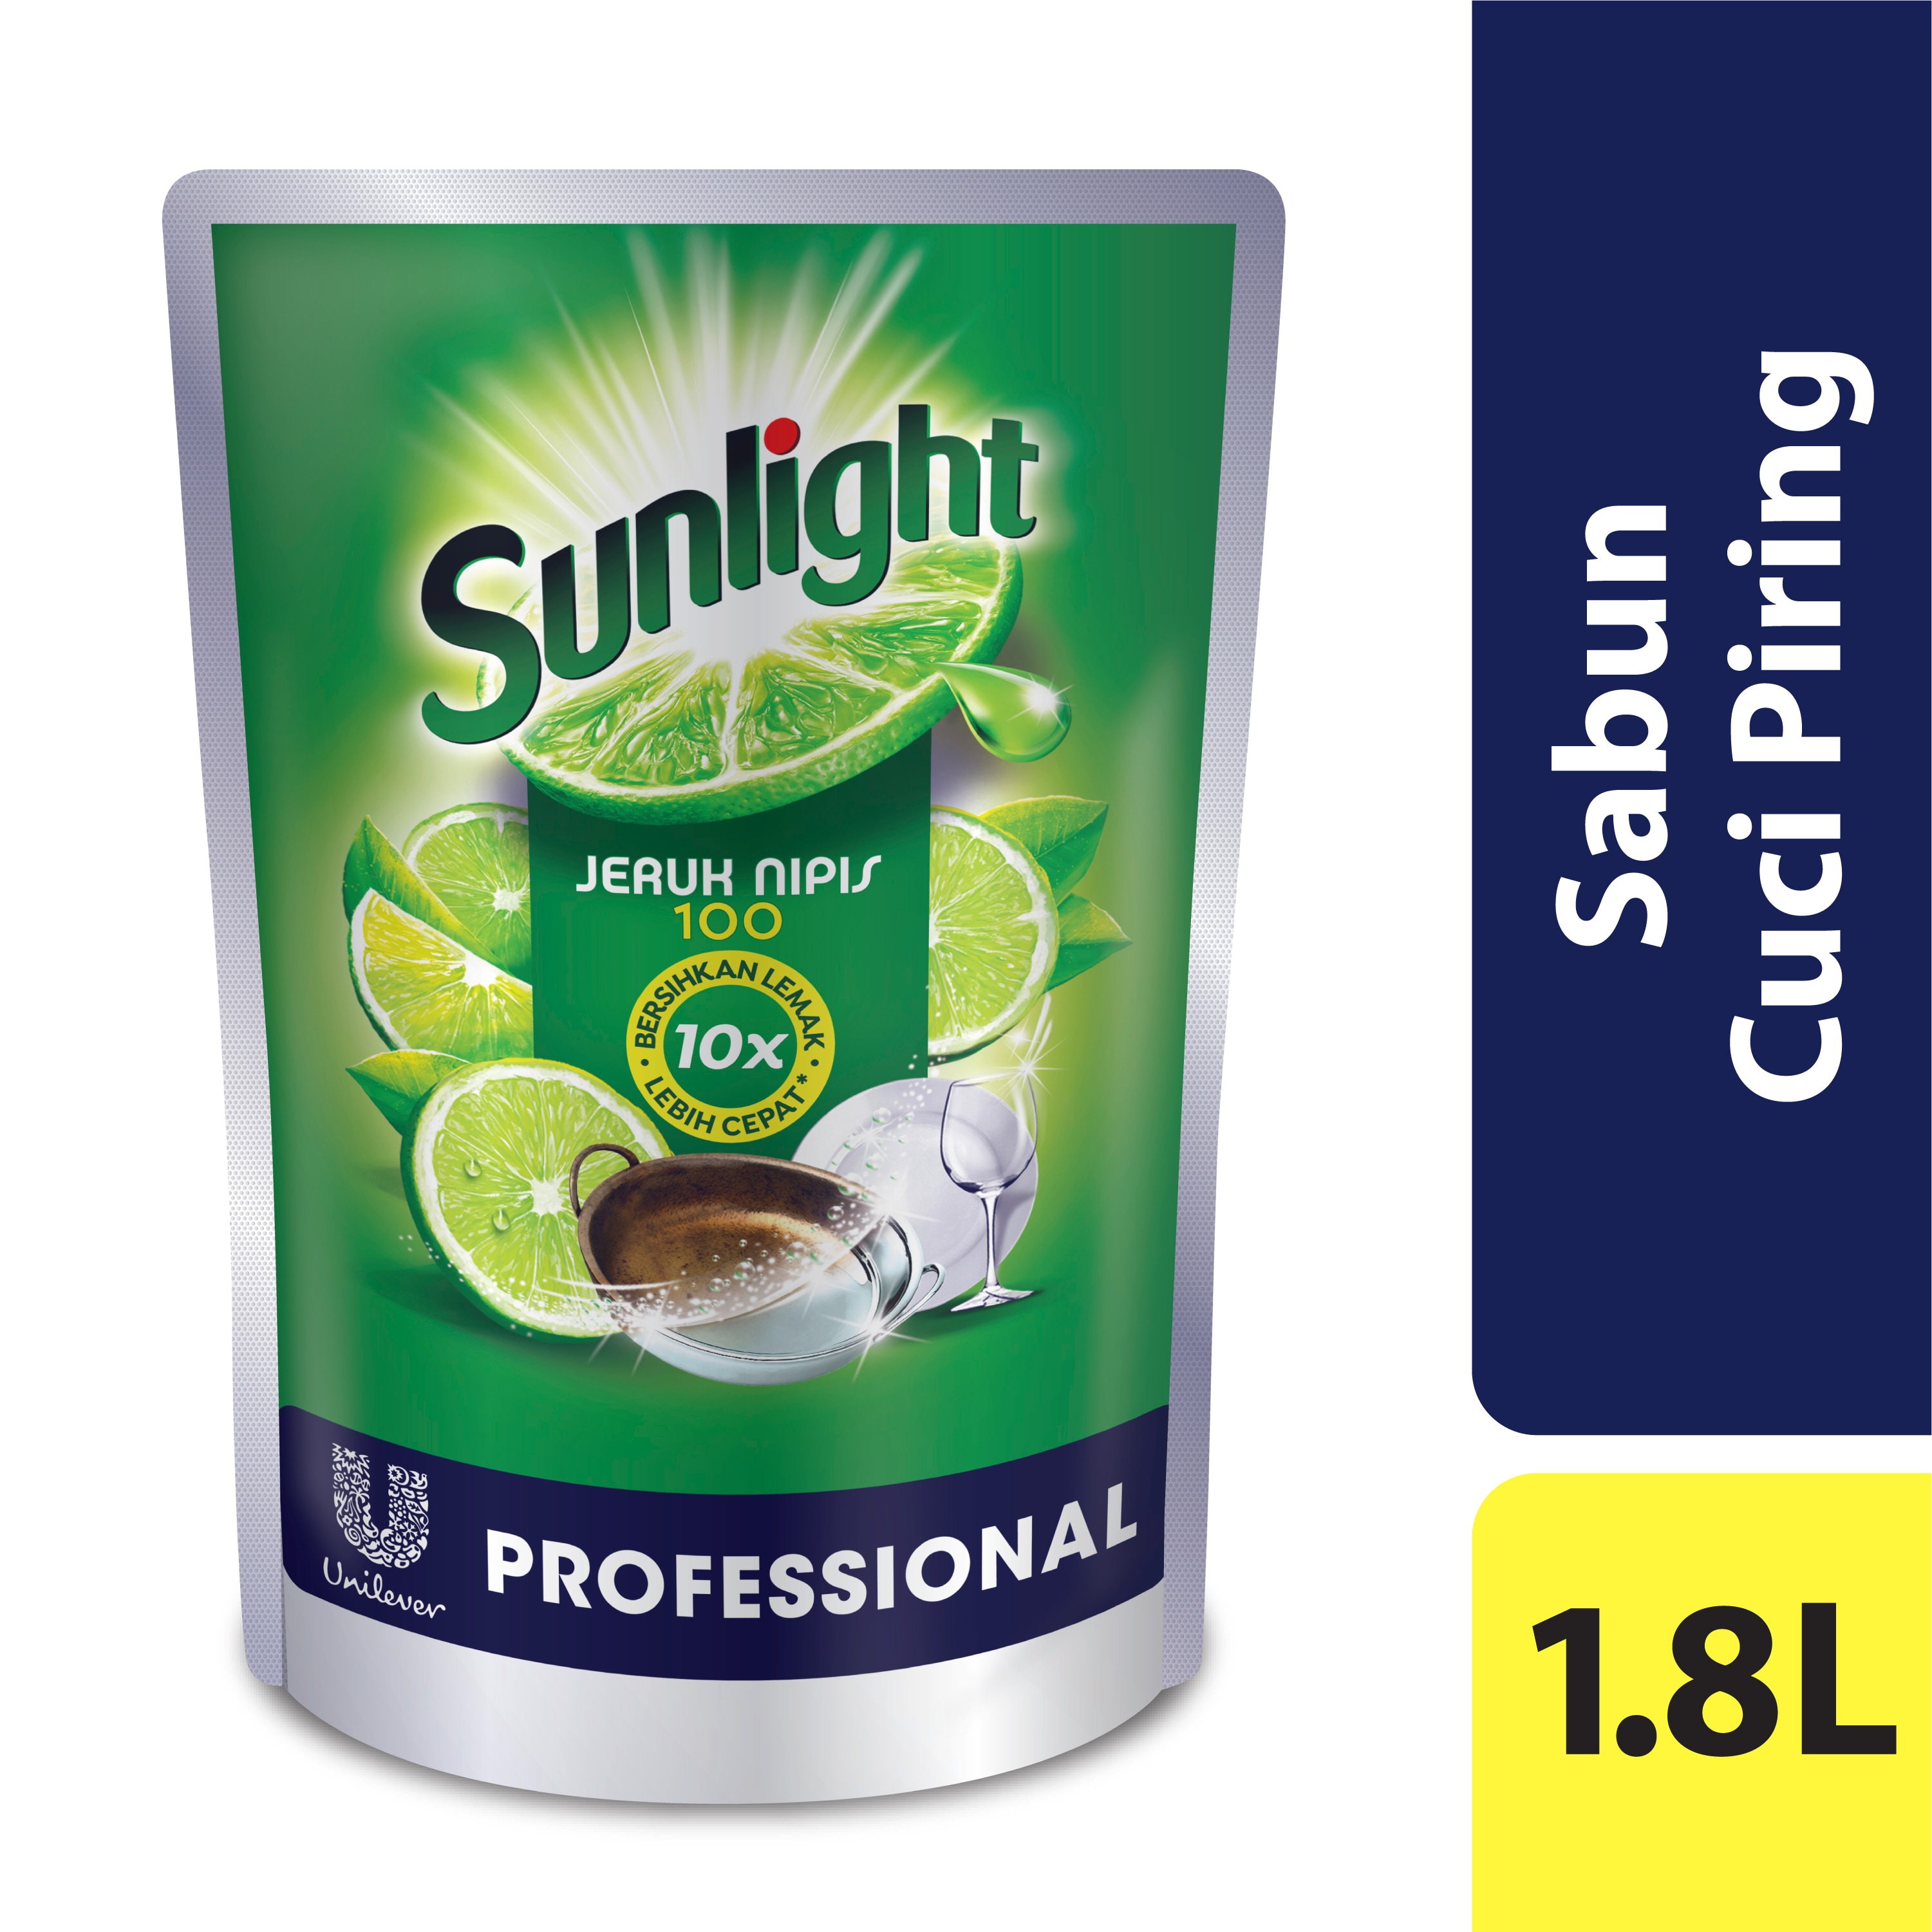 Sunlight Pro Lime Pouch 1.8L - Sunlight 10X Most Powerful Degrease, Easy Rinse, Gentle on Hands